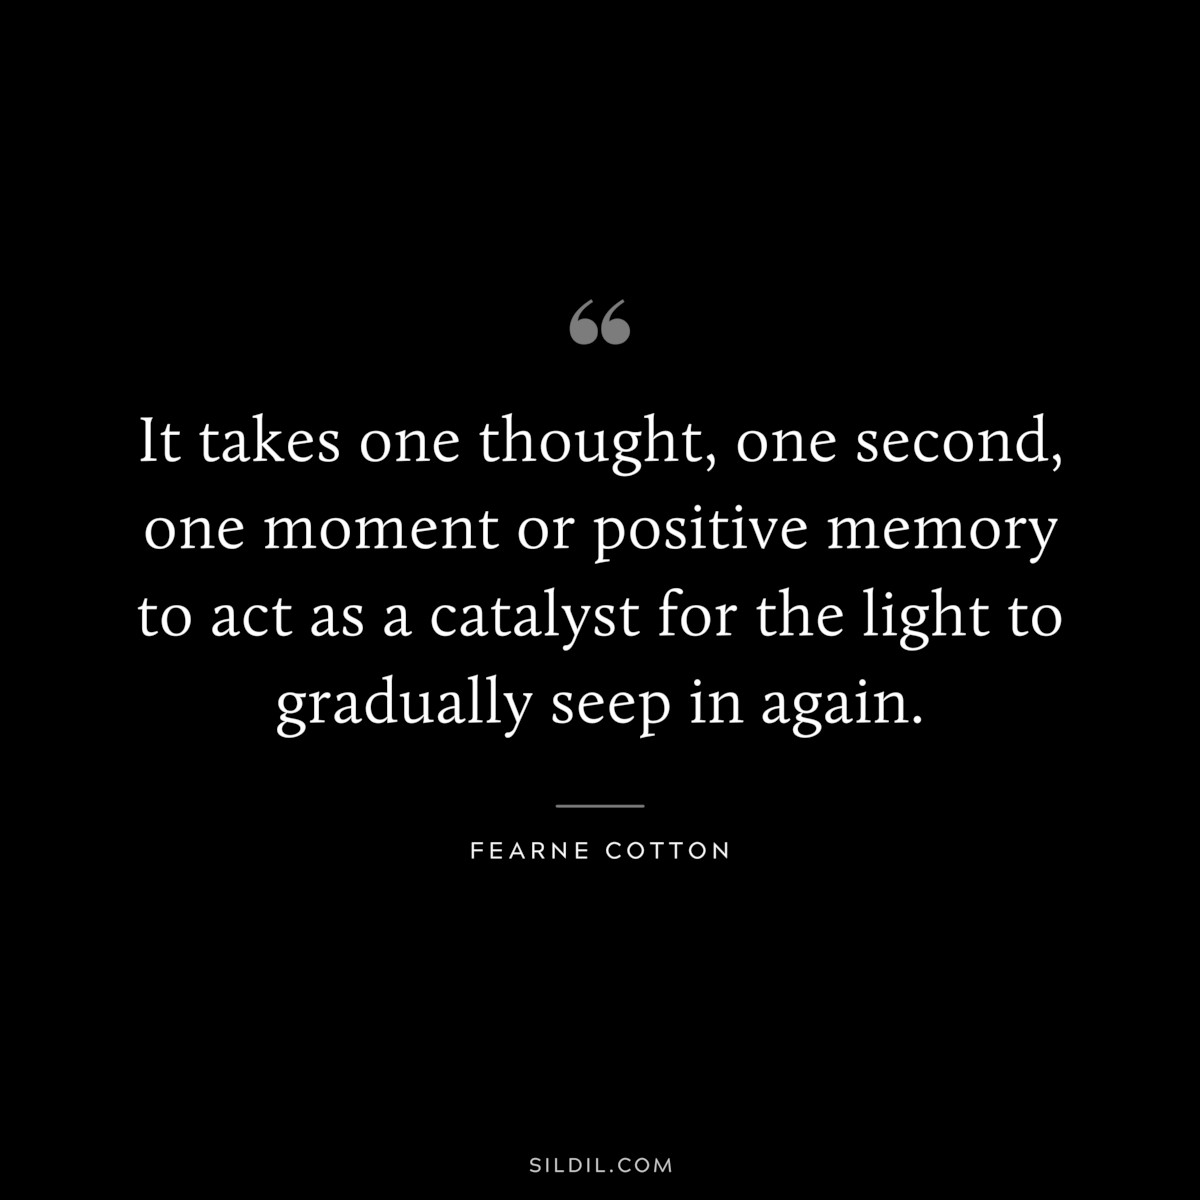 It takes one thought, one second, one moment or positive memory to act as a catalyst for the light to gradually seep in again. ― Fearne Cotton